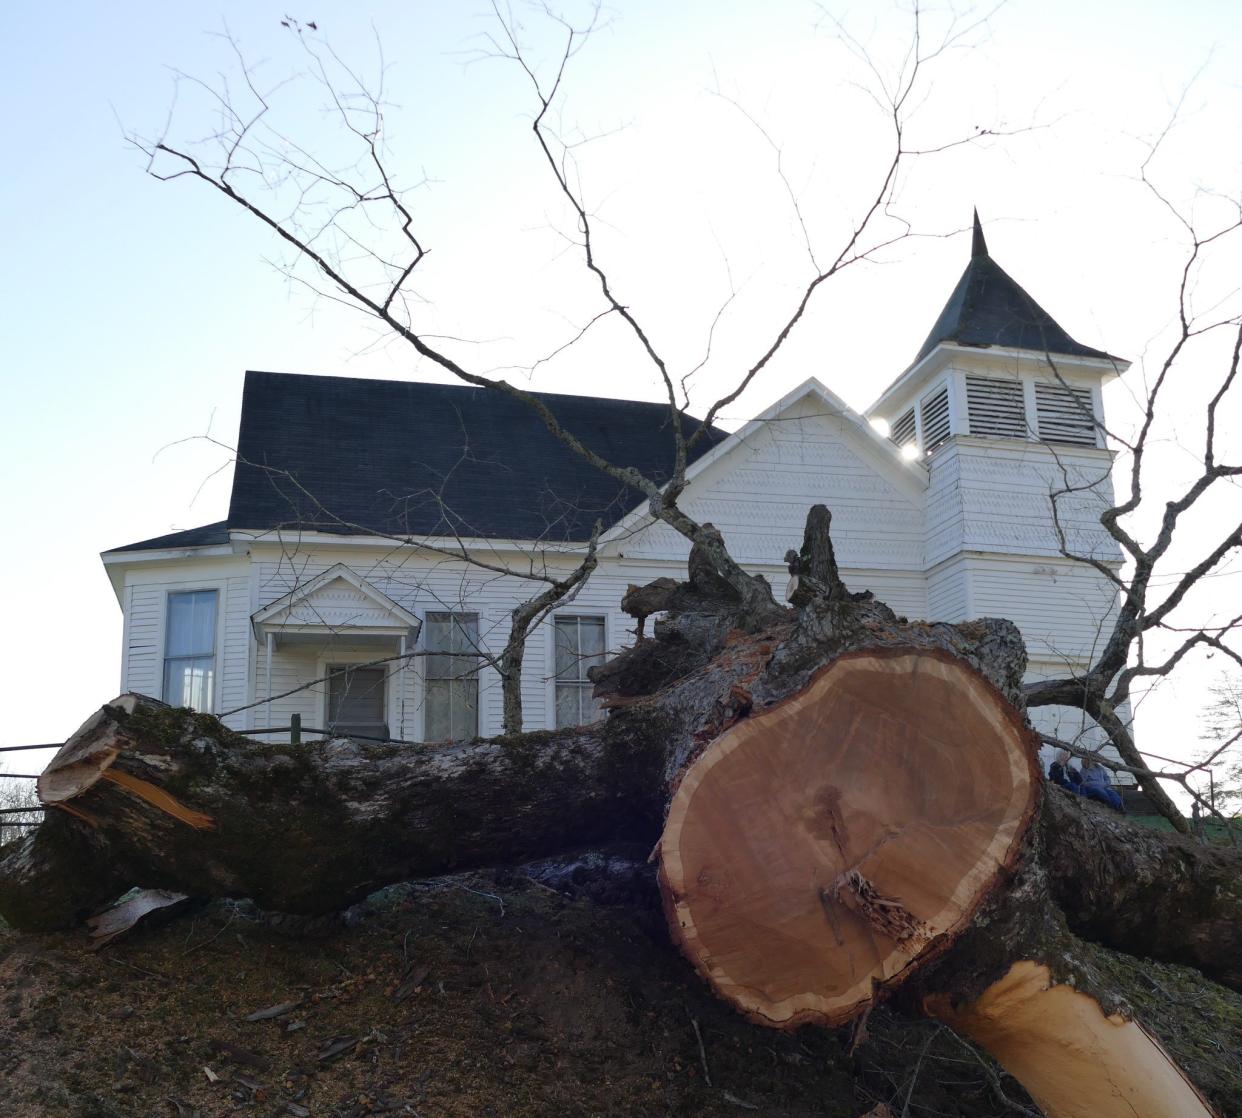 A landmark oak tree in the Walnut community of Marshall was uprooted due to the high winds April 1, leaving a community to reflect on its importance to the county.